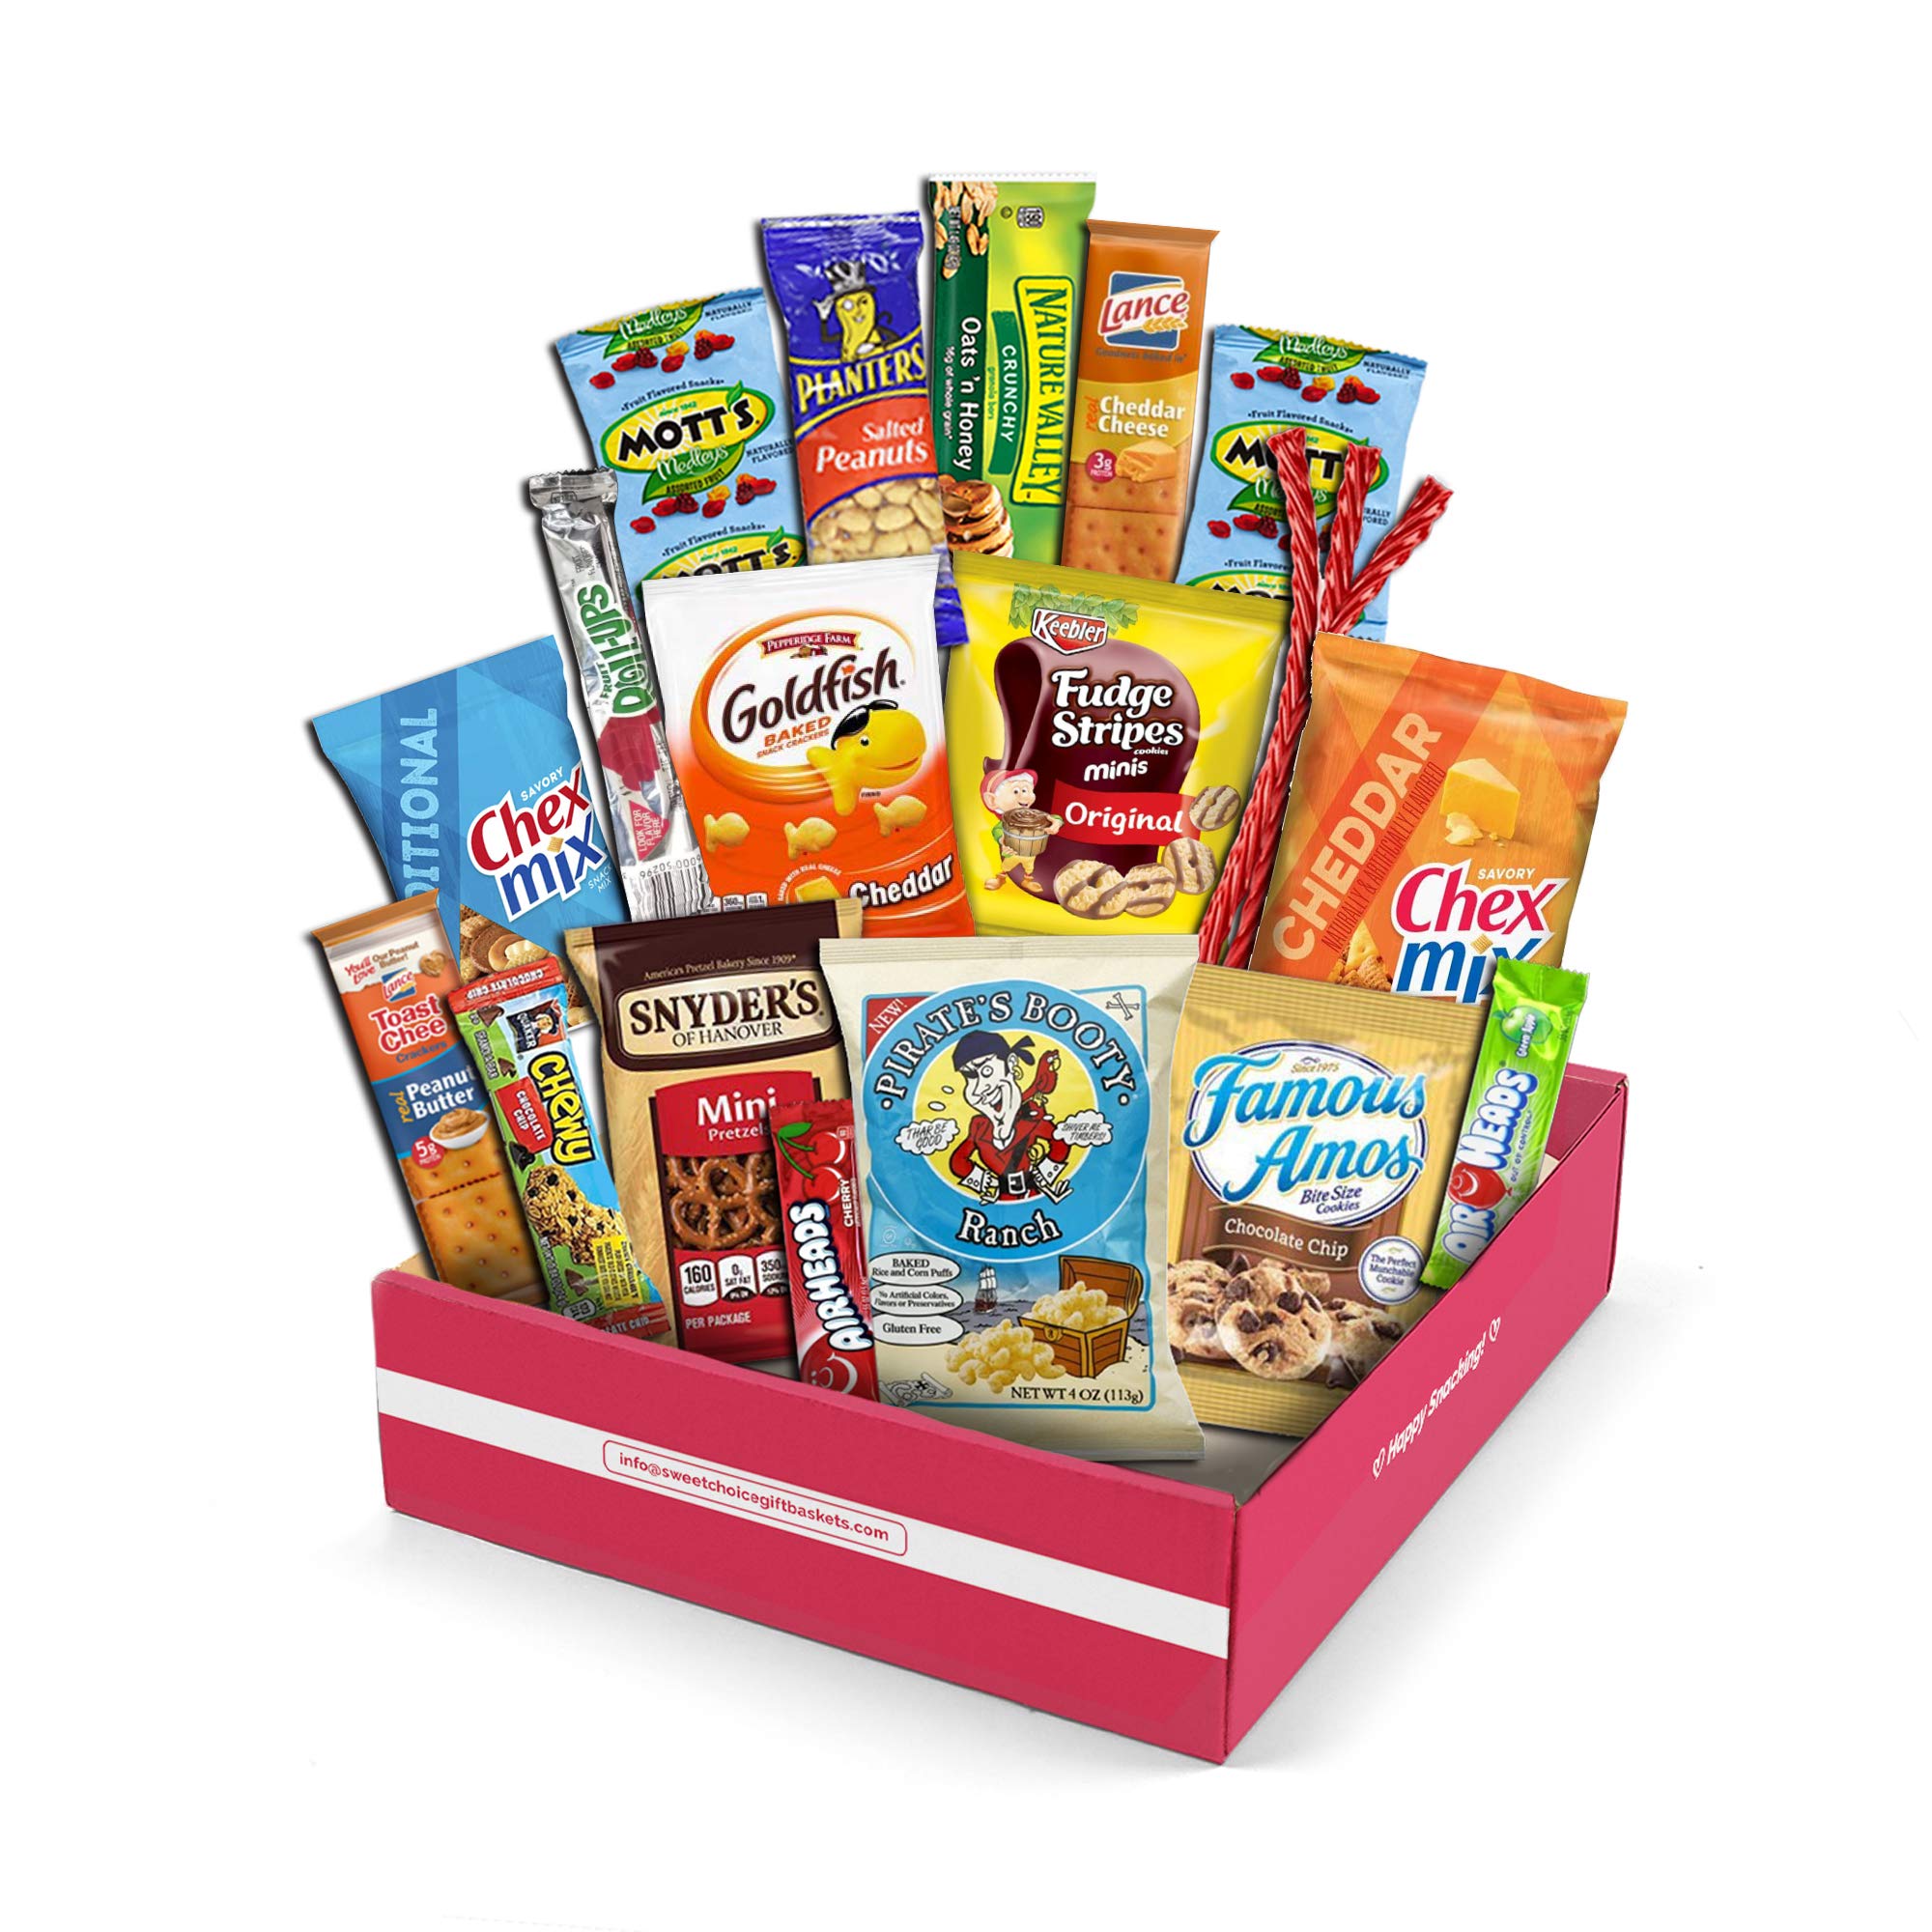 Snack Care Package & Snack Box American Snack Box Candy Box College Care  Package for Her, for Him College Snackbox Snack Gift Basket 